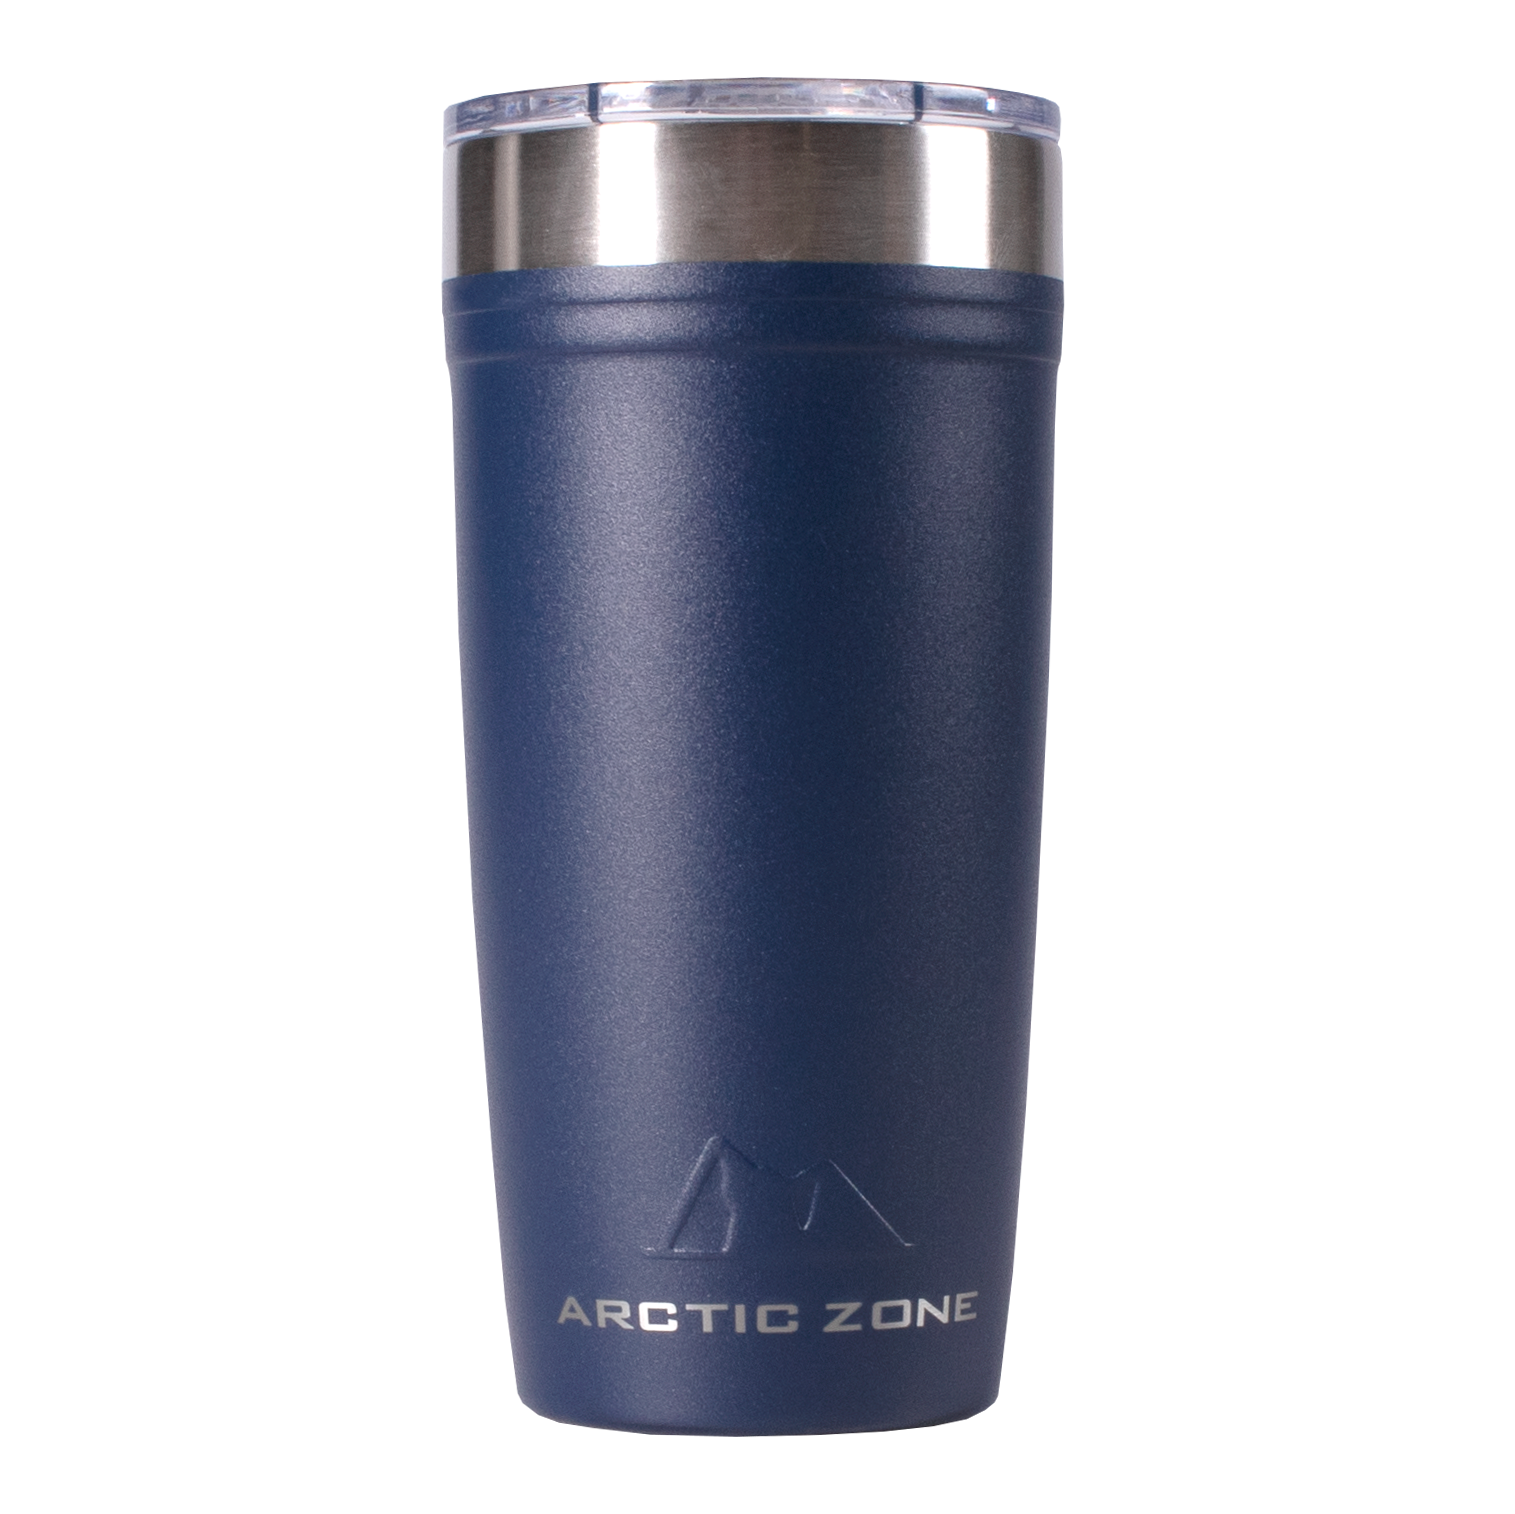 Navy Arctic Zone Tumbler with hydrow logo on side